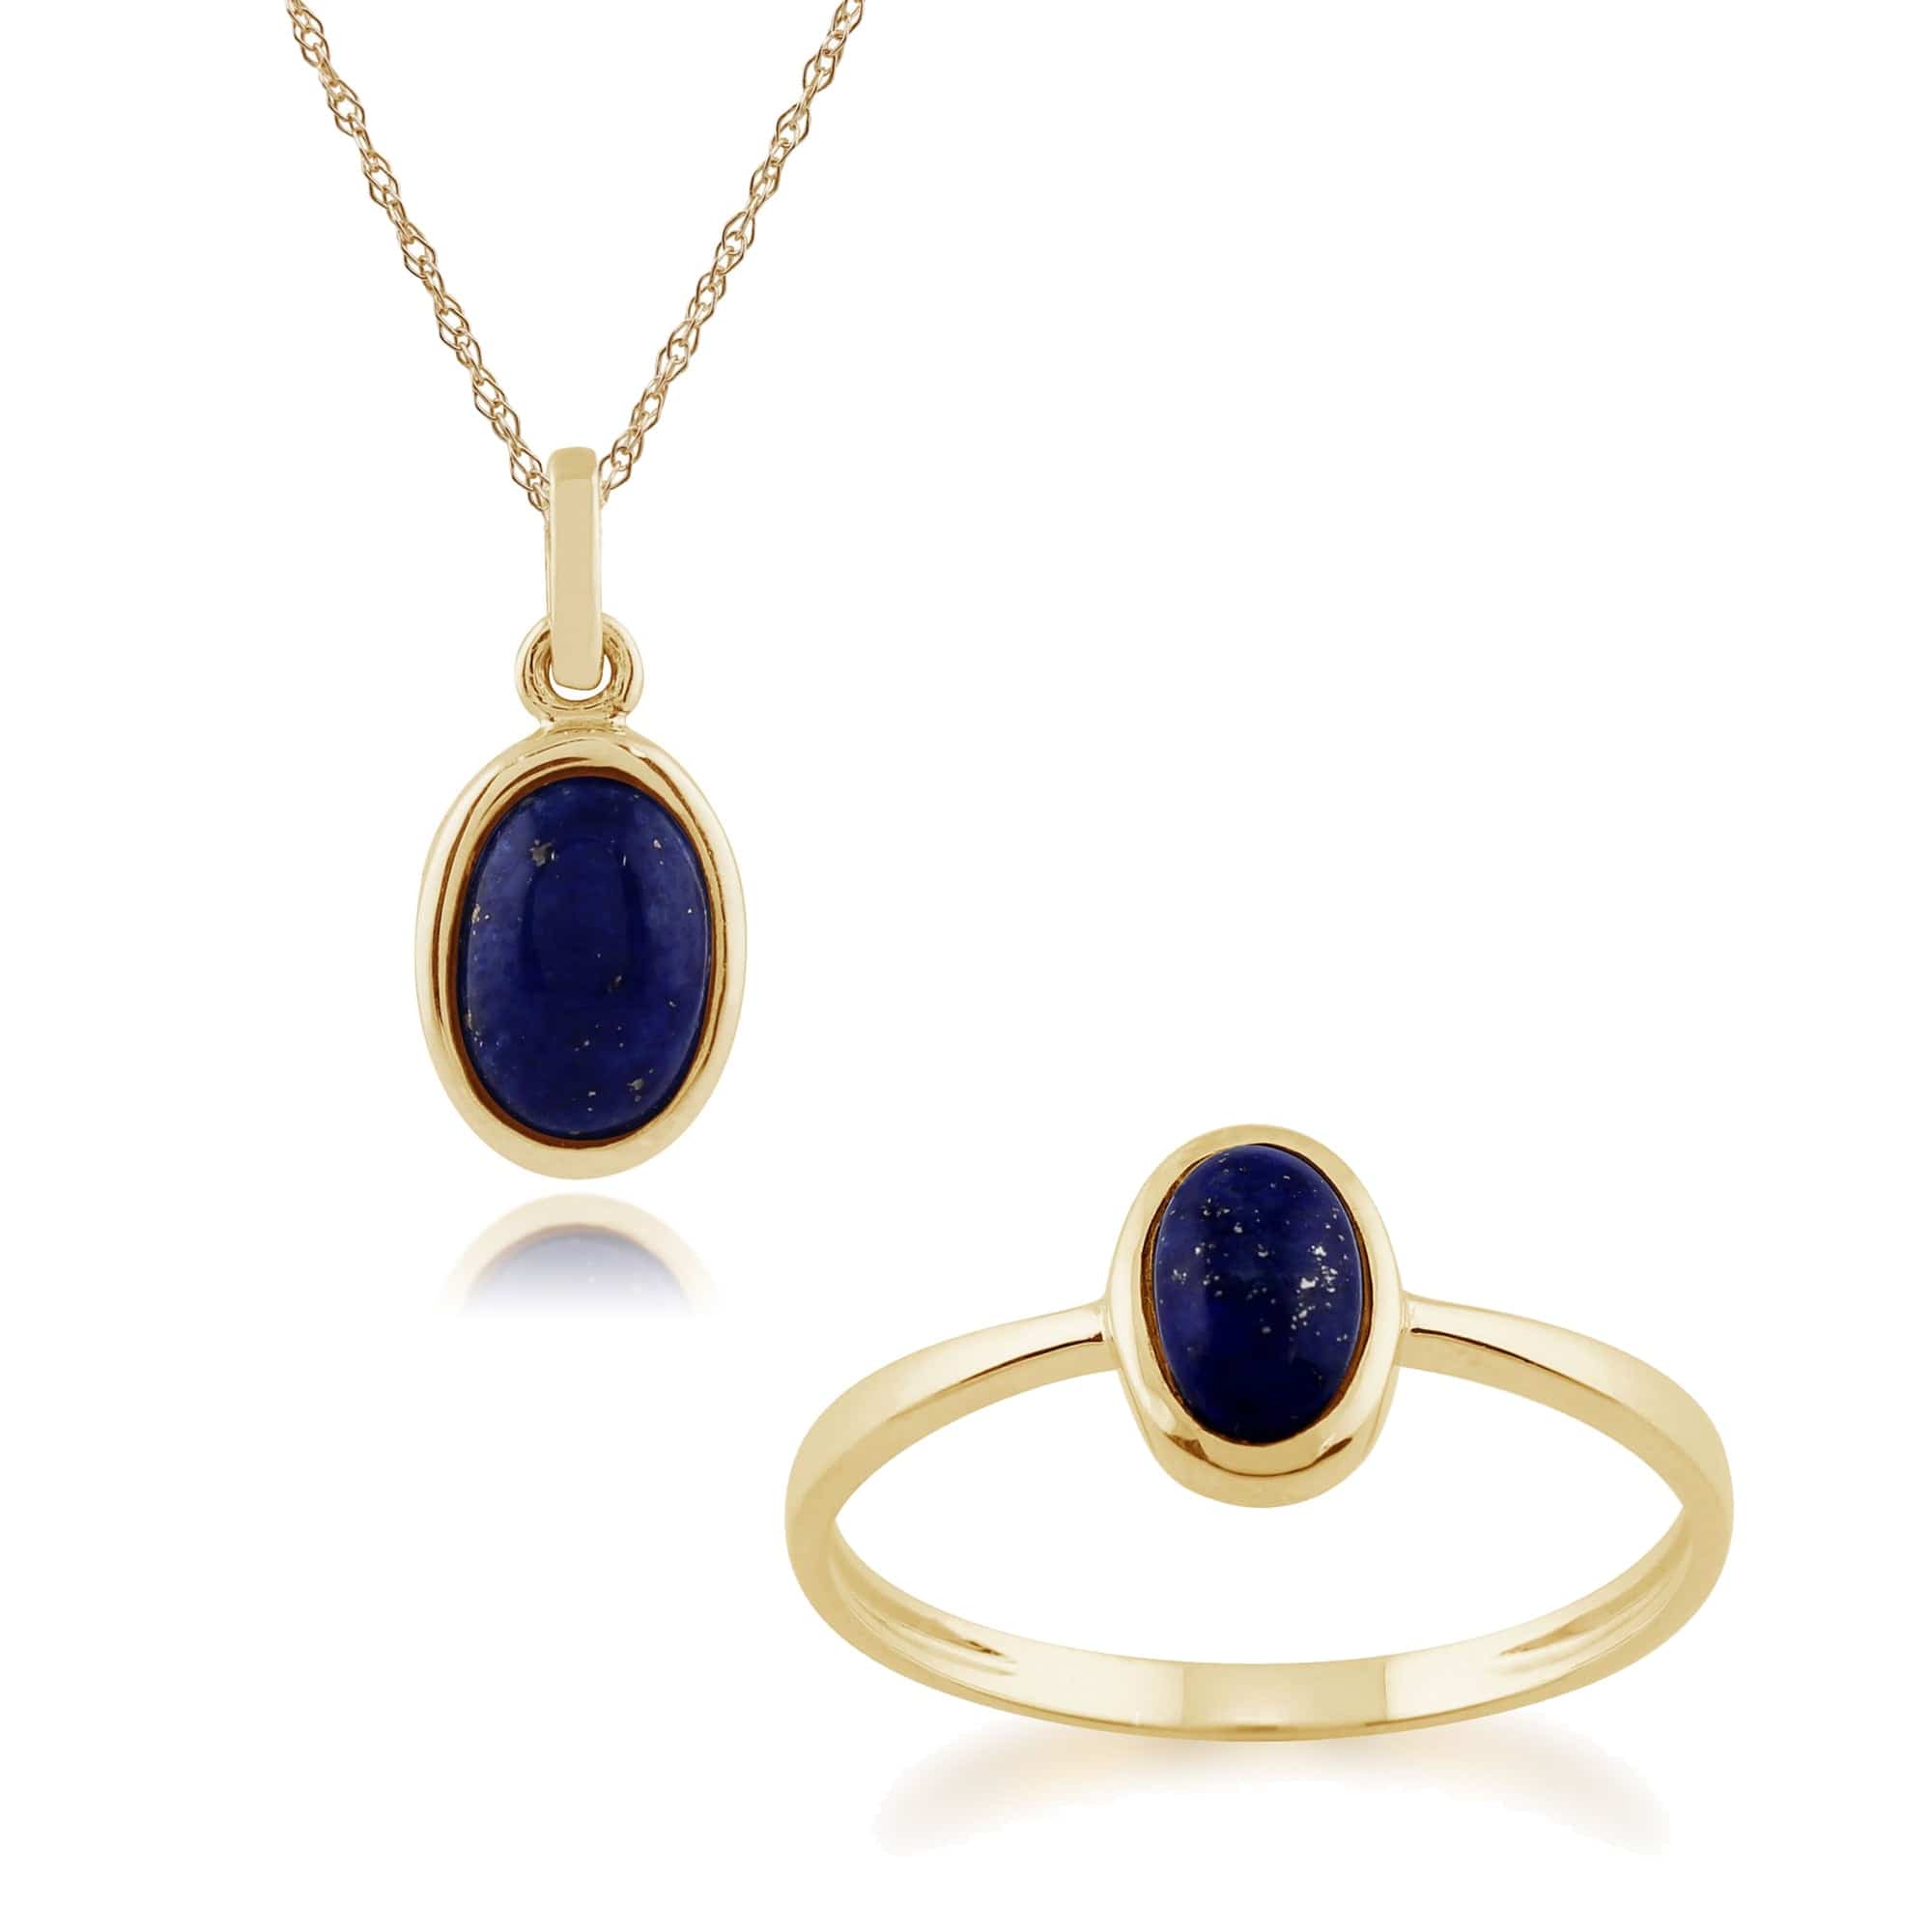 135P1566029-135R1295029 Classic Oval Lapis Lazuli Bezel Pendant & Solitaire Ring Set in 9ct Yellow Gold 1